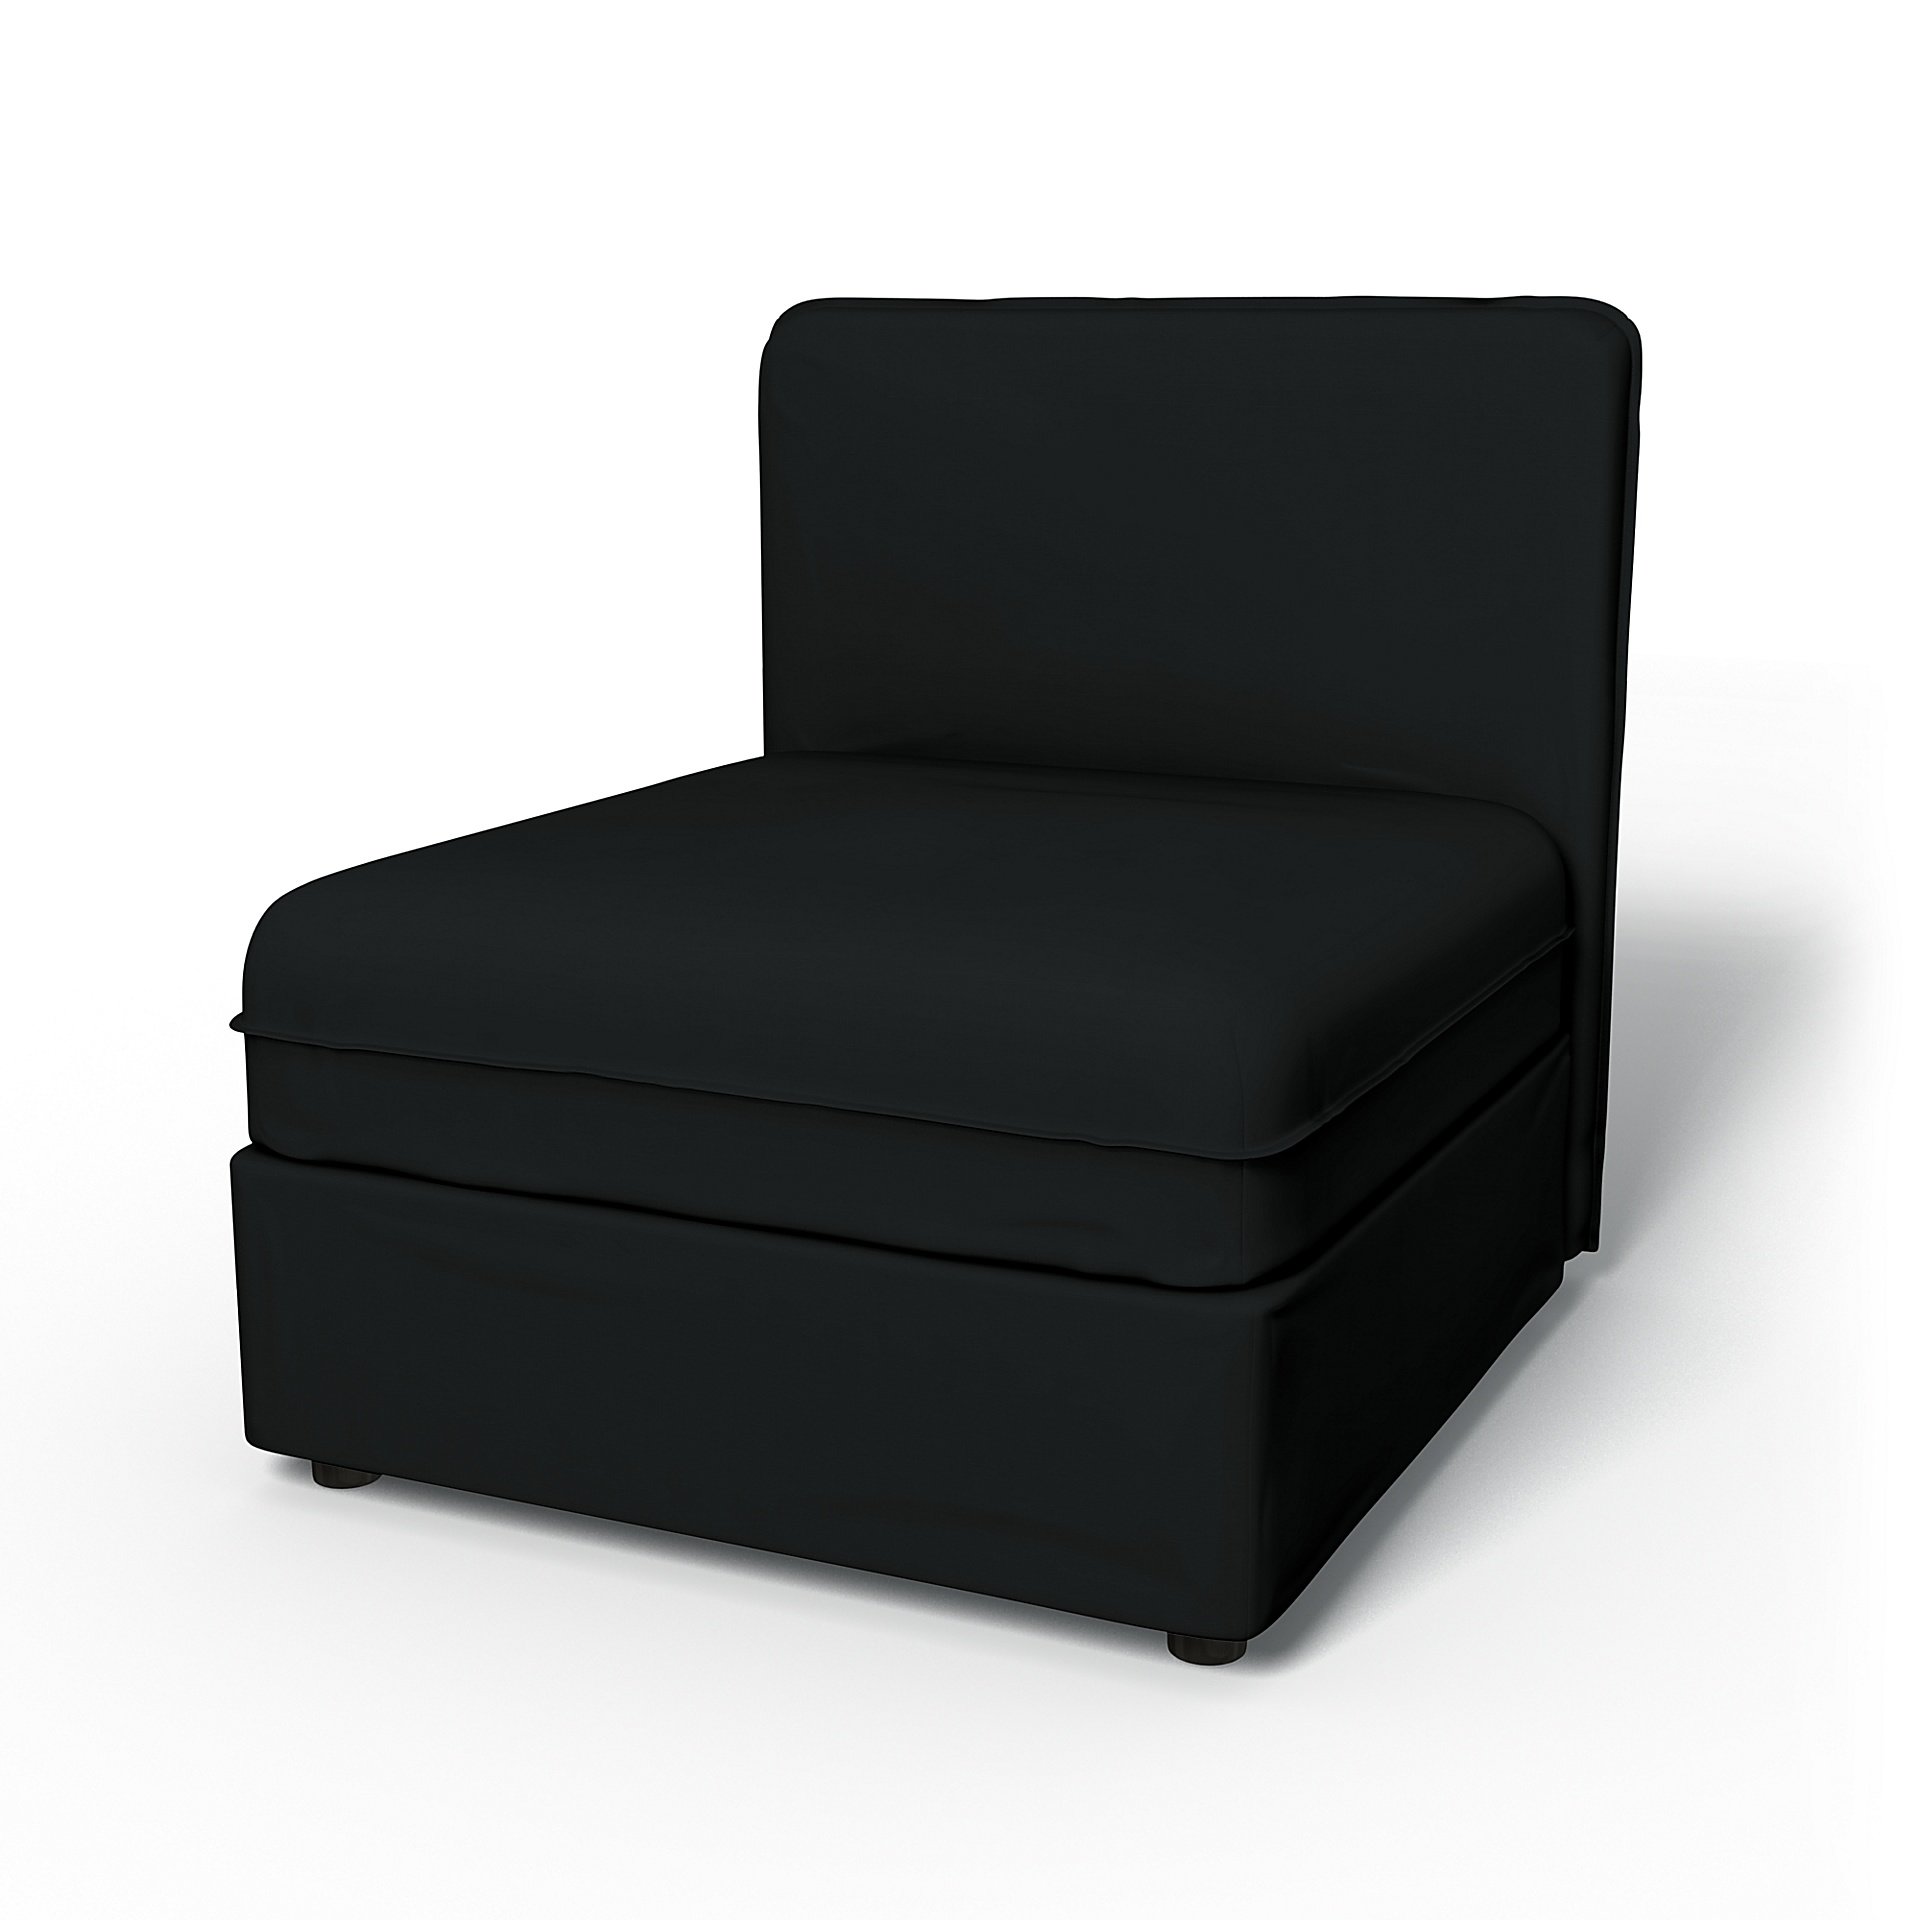 IKEA - Vallentuna Seat Module with Low Back Cover 80x80cm 32x32in, Jet Black, Cotton - Bemz